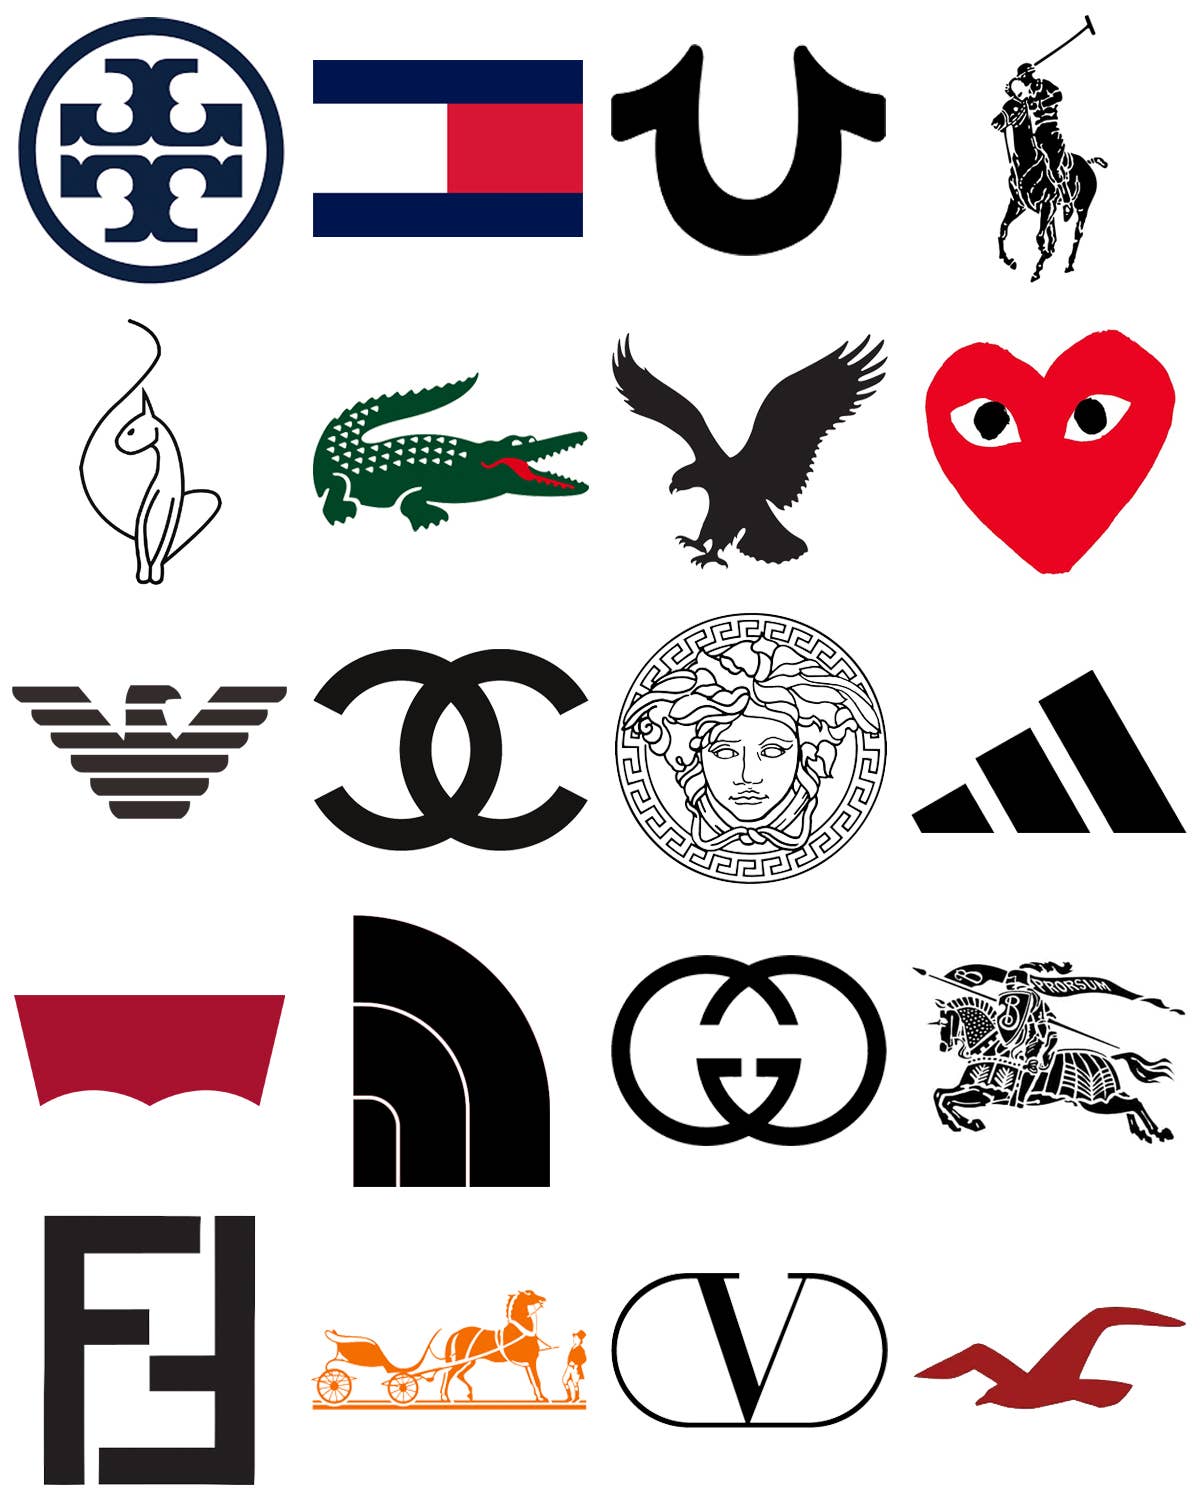 How Well Do You Know Fashion Logos?